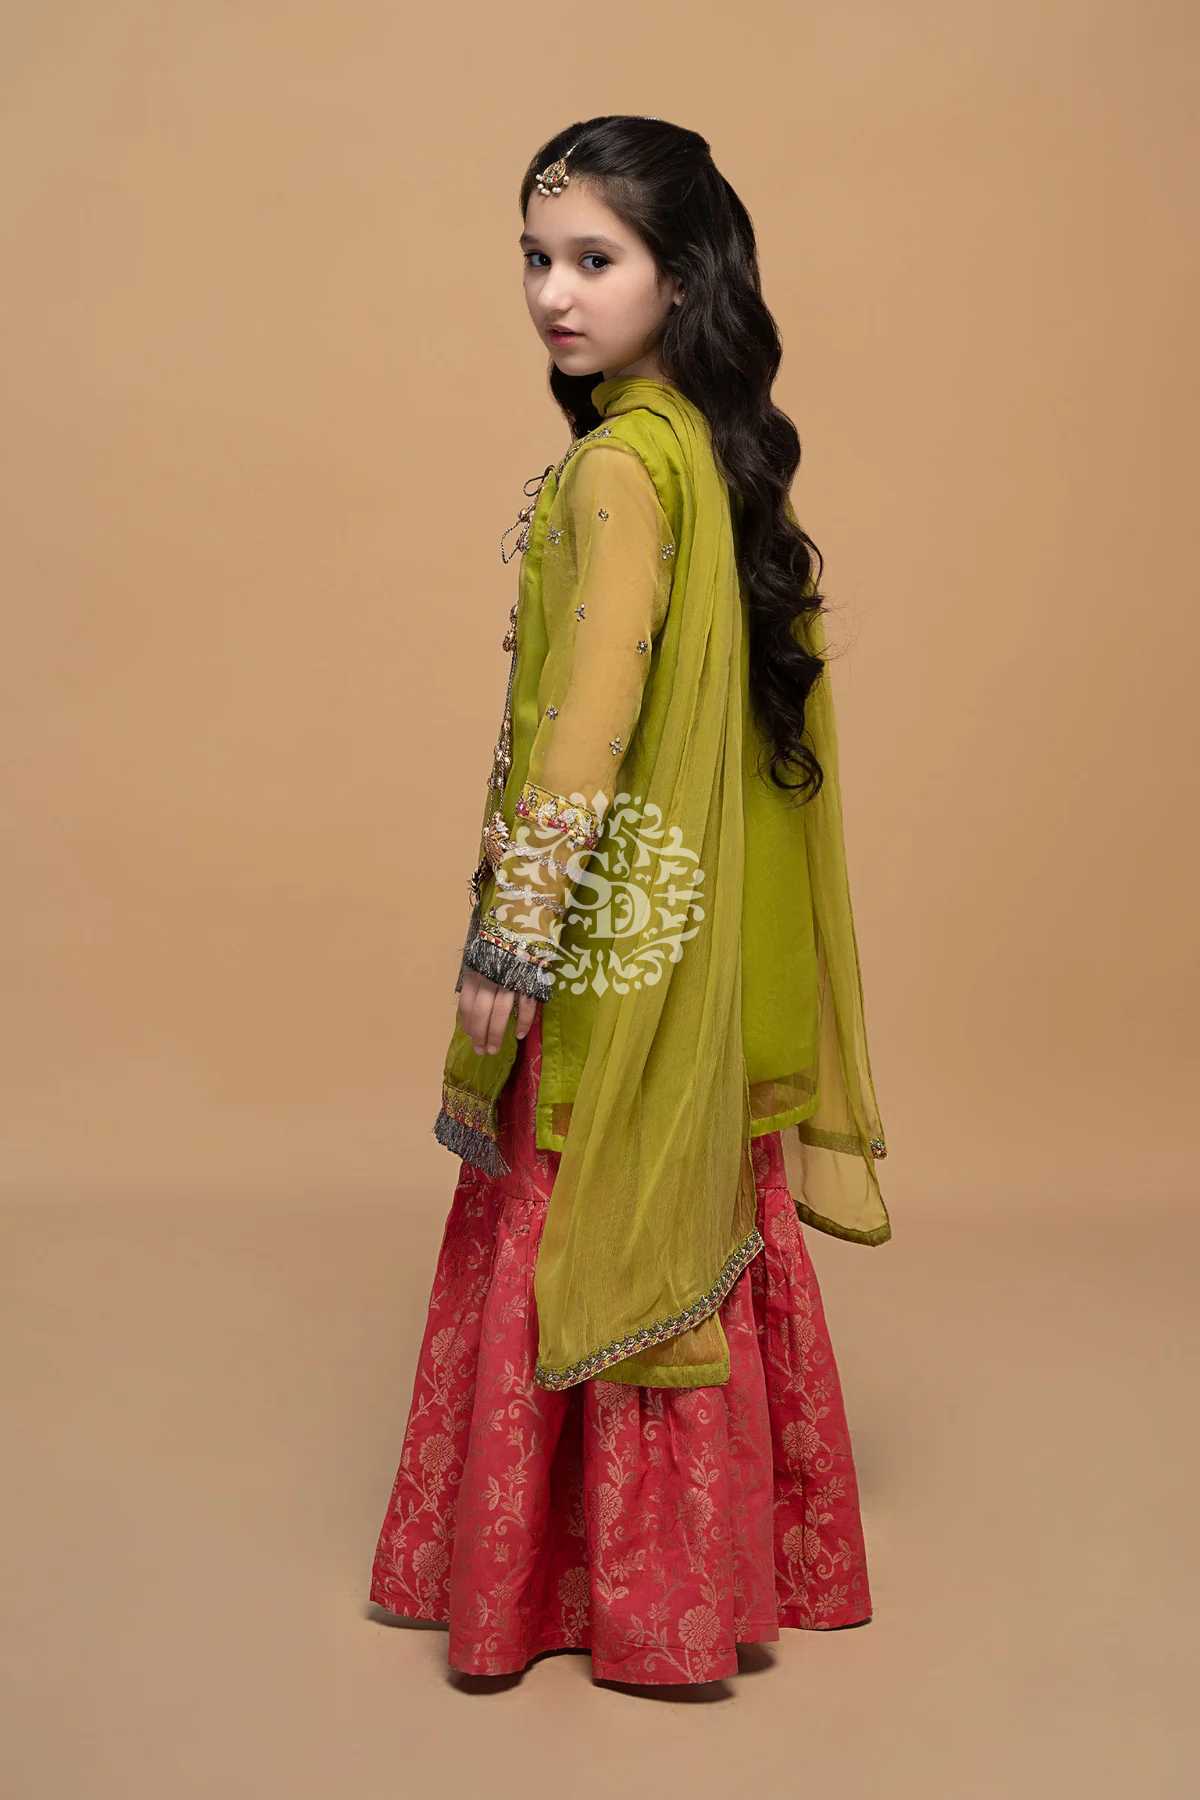 SAI DRESSES PRESENT D.NO 24 READY TO WEDDING WEAR GHARARA STYLE DESIGNER PAKISTANI KIDS COMBO SUITS IN WHOLESALE RATE IN SURAT